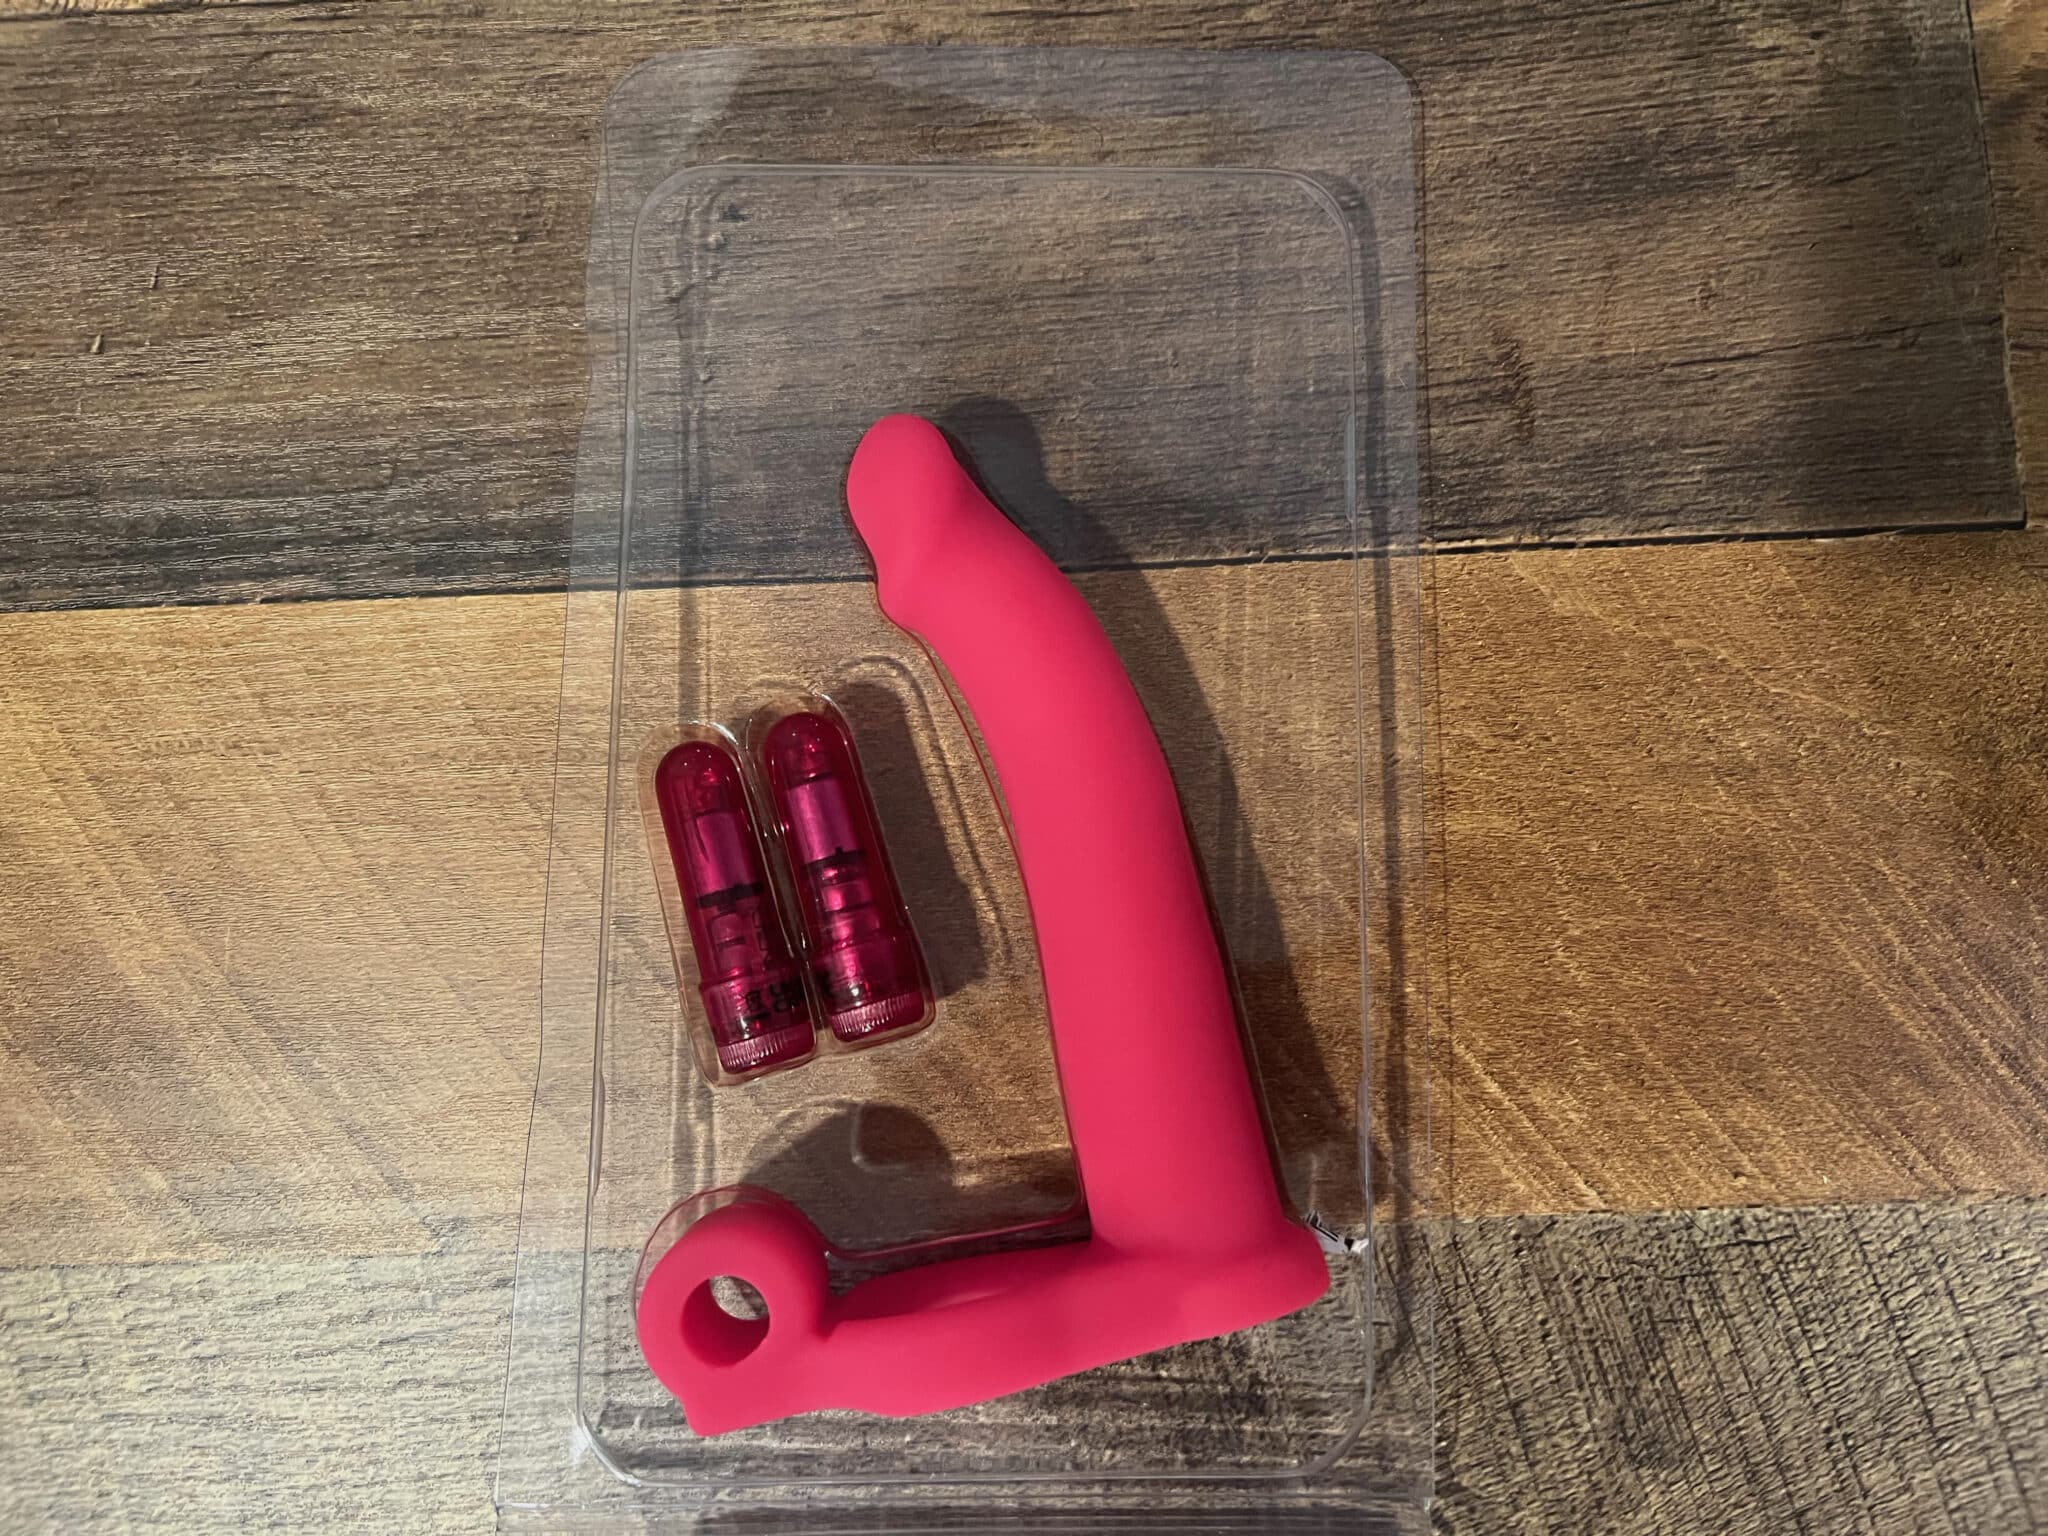 Nasstoys Double Penetrator Studmaker Cock Ring Price and Value: Analyzing the Nasstoys Double Penetrator Studmaker Cock Ring